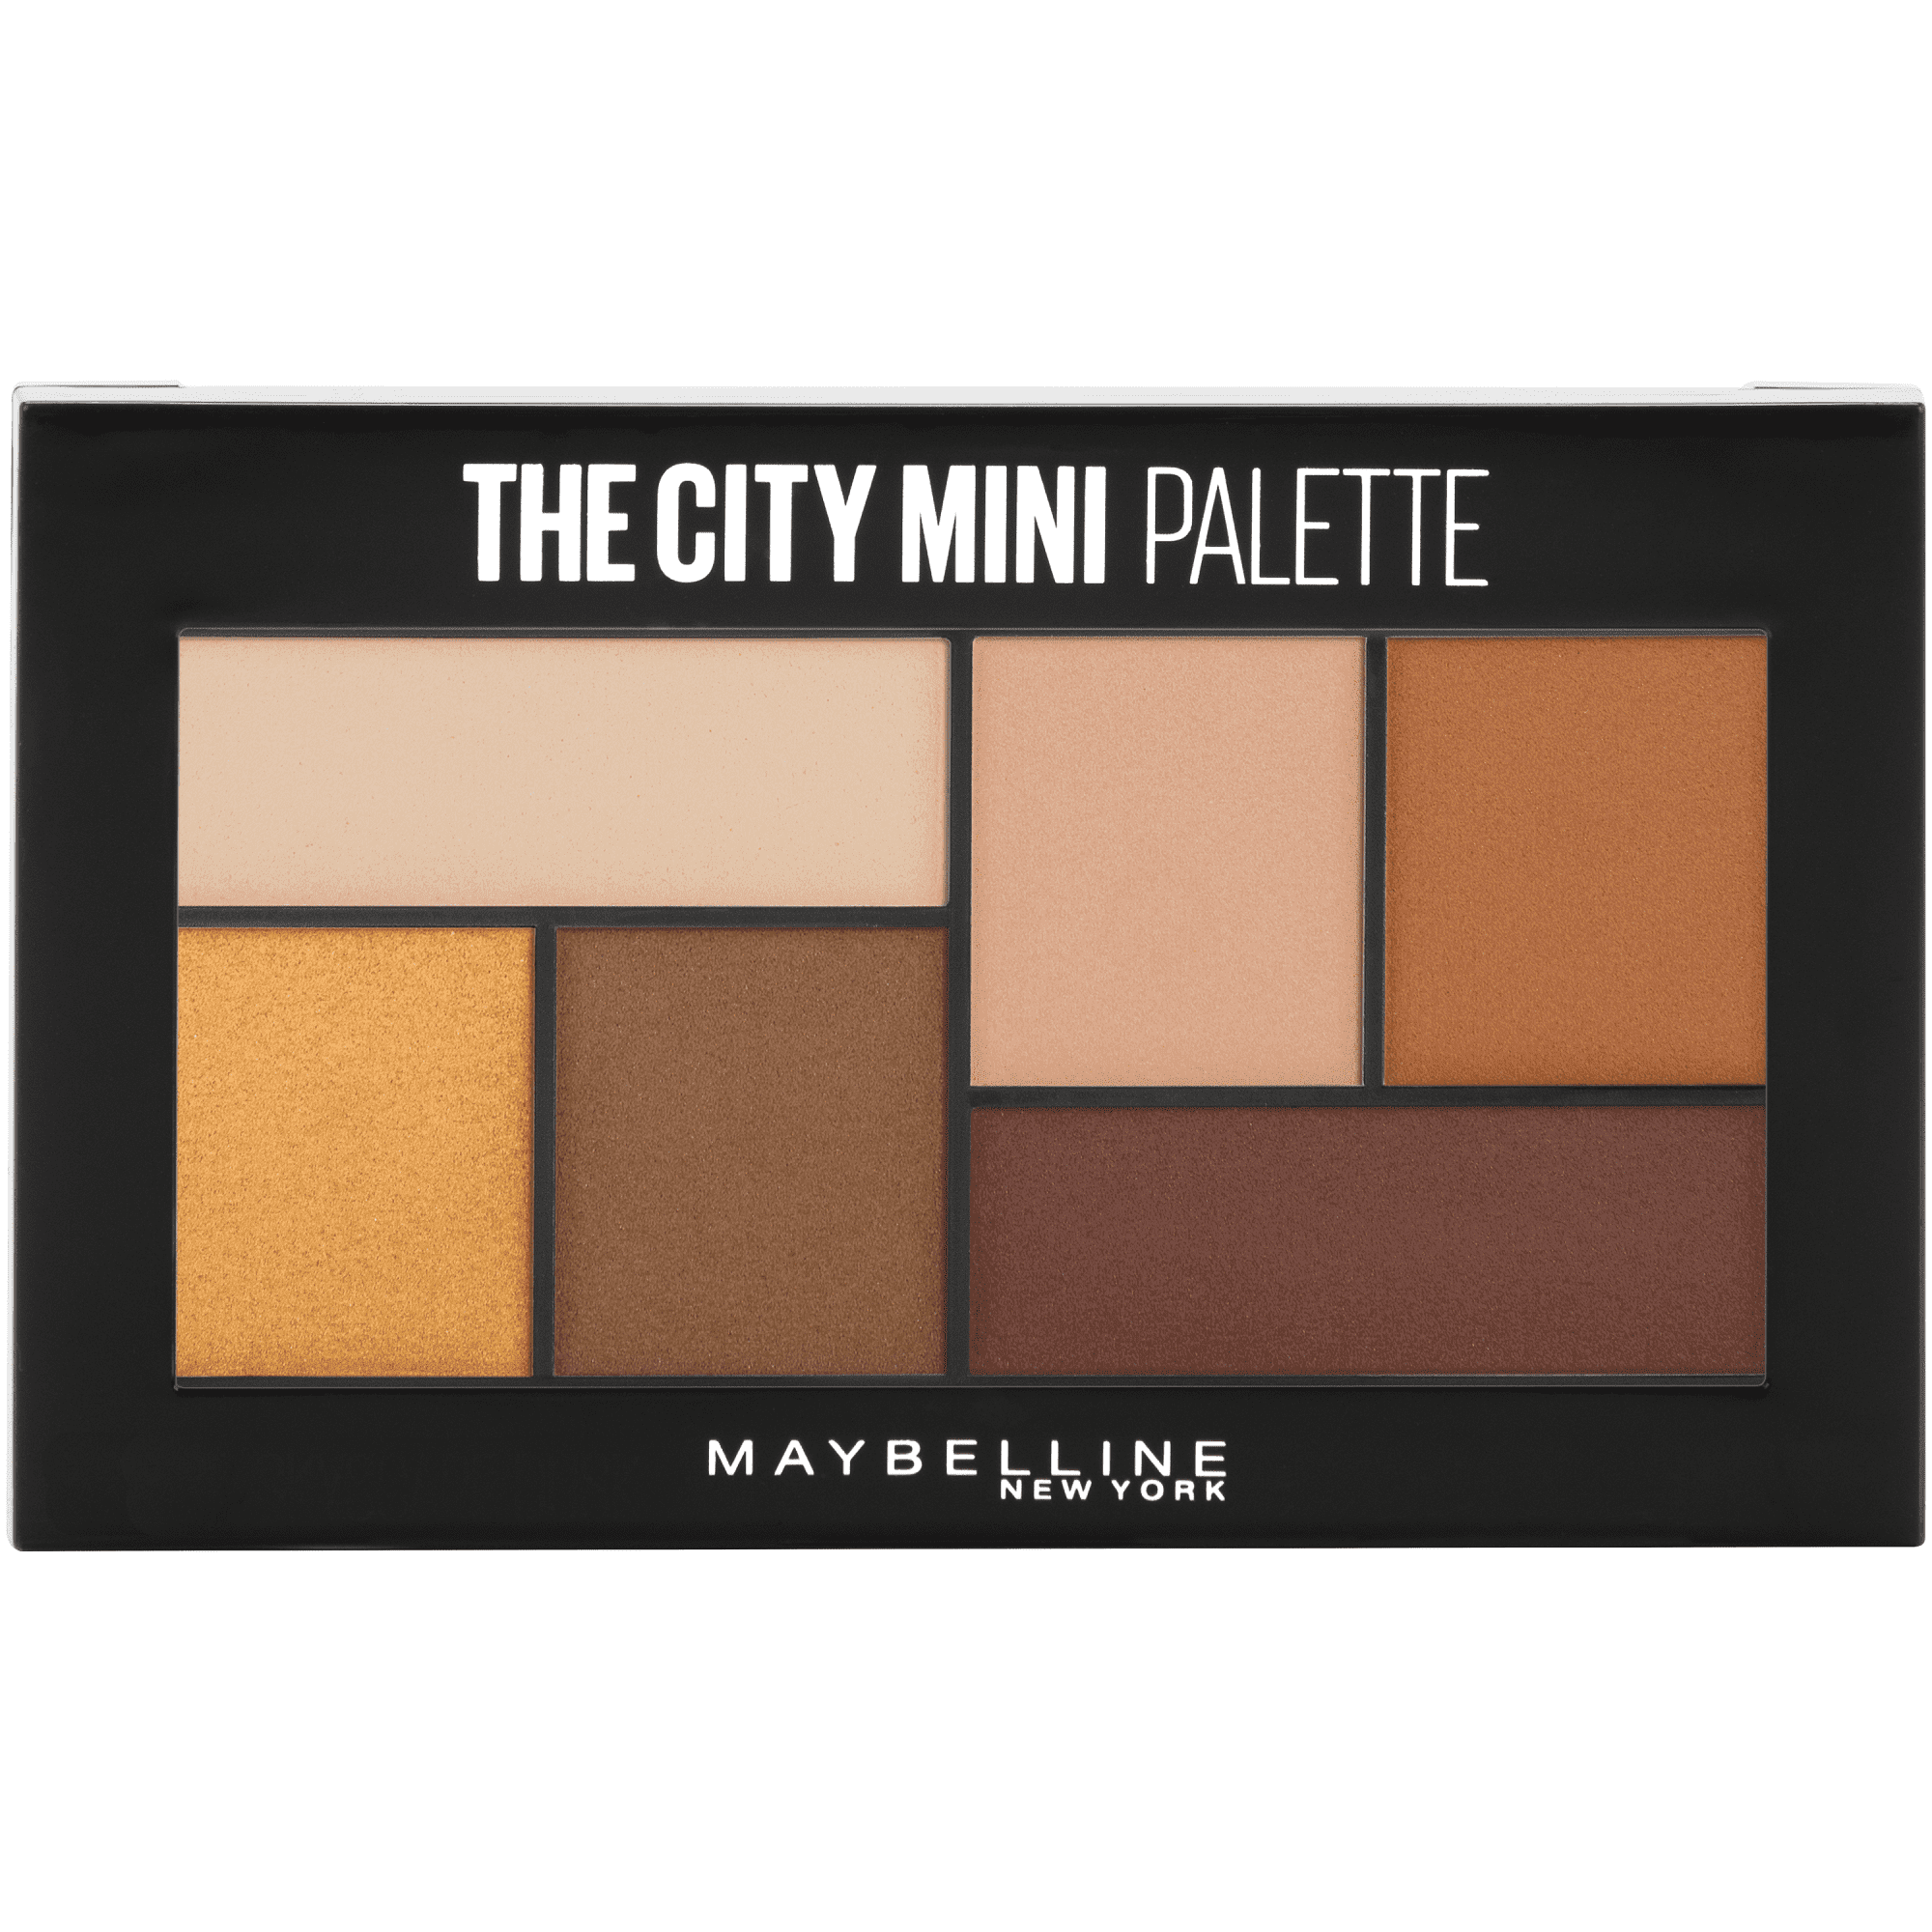 Mini City Eyeshadow The About Town Makeup, Palette Maybelline Matte